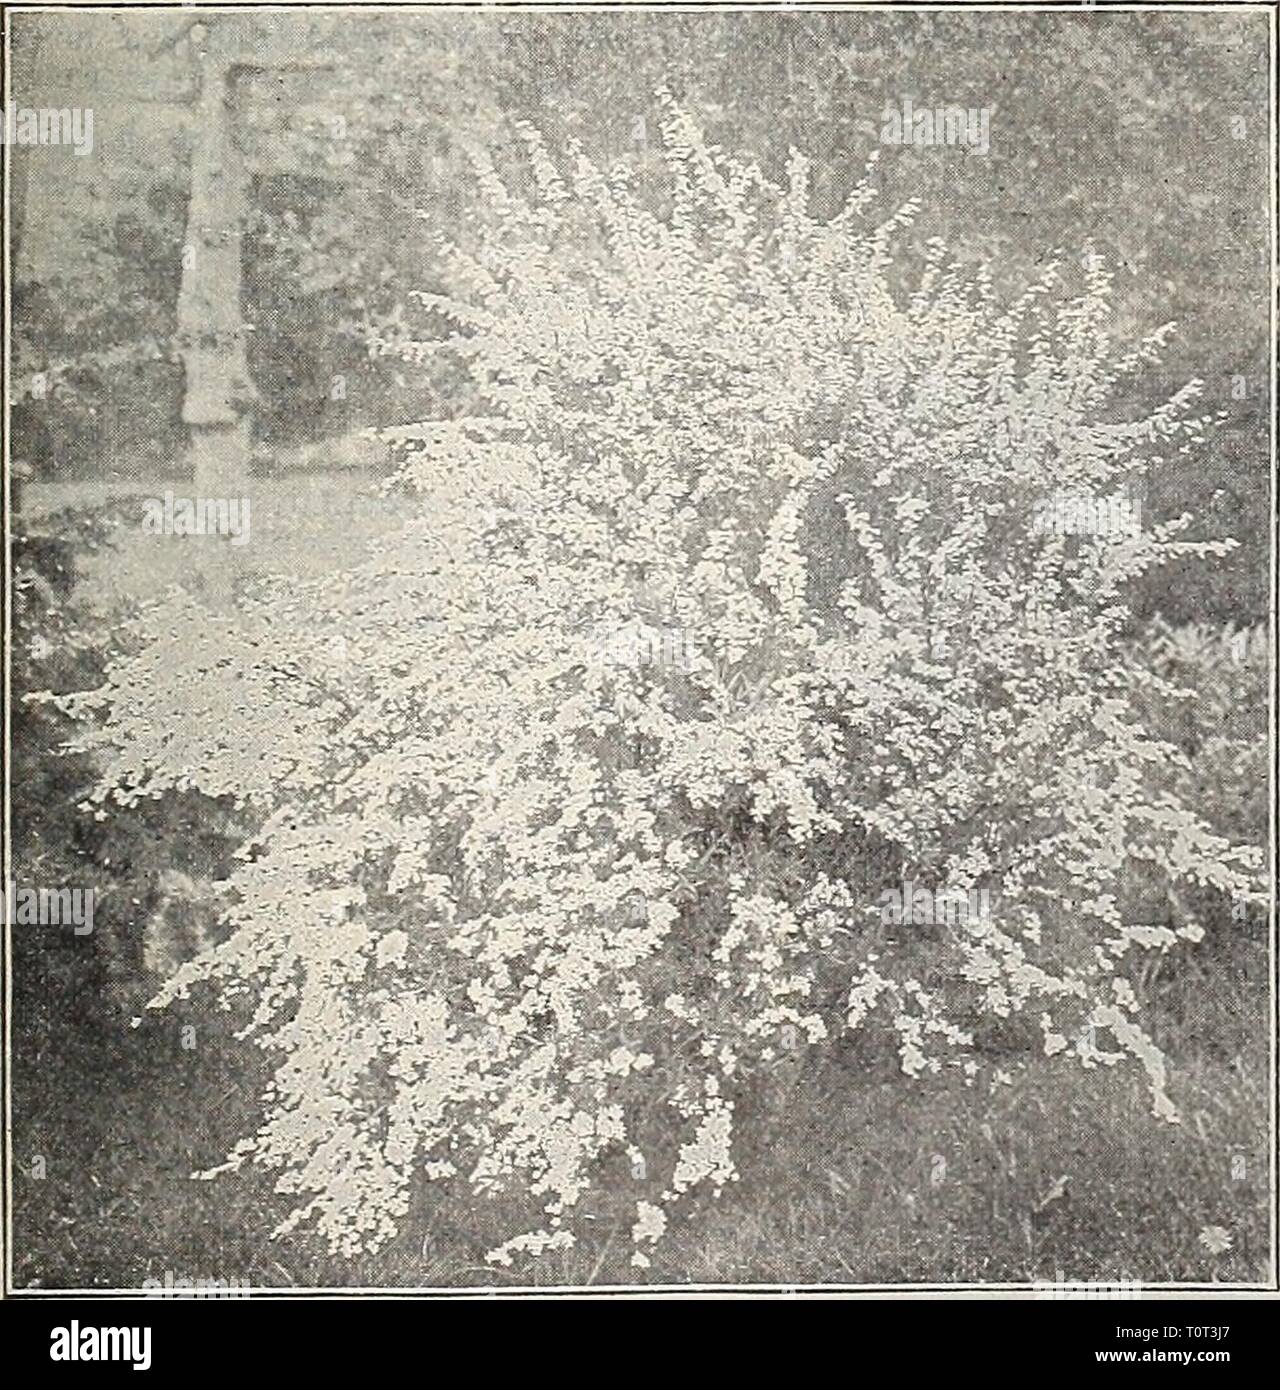 Dreer's 1909 garden book (1909) Dreer's 1909 garden book  dreers1909garden1909henr Year: 1909  Spir.ea Van Houttei. SpirÂ«a Reevesii T Spiraea Margaritae. A handsome free-flowering variety with large, flat heads of soft pink flowers from June to October; grows from 3 to 4 feet high, and is one of the most desirable varieties in our collection. 25 cts. each. â Opulifolia aurea {I'irginian Guelder Rose). An in- teresting variety of medium growth with golden-tinted foliage and large white flowers in June. 25 cts. each. â Prunifolia {Bridal Wreath). A favorite variety and one of the best; it is a  Stock Photo